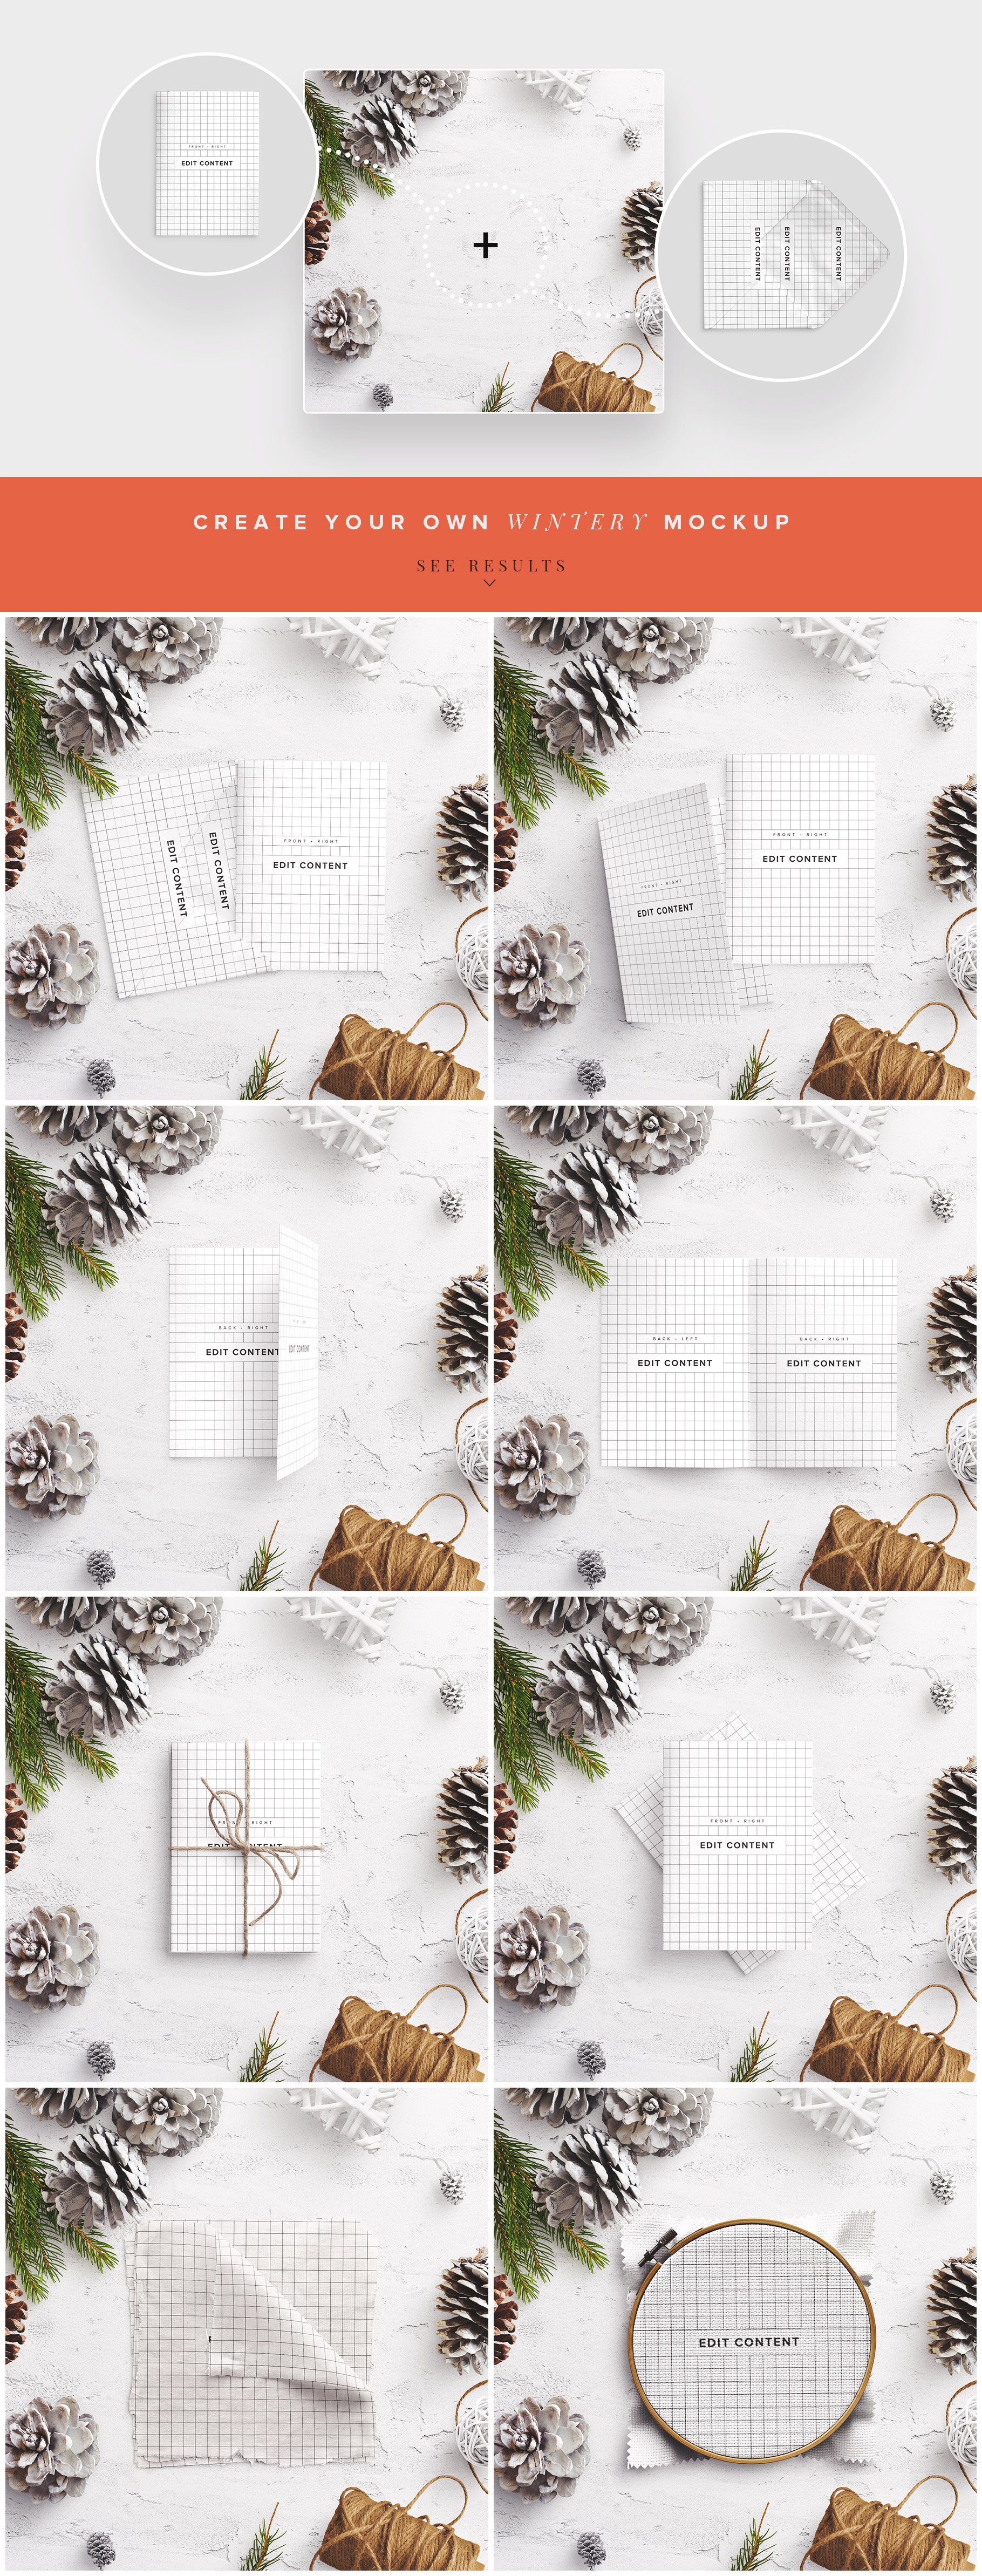 01 winter collection examples create your own mockup customscene 703